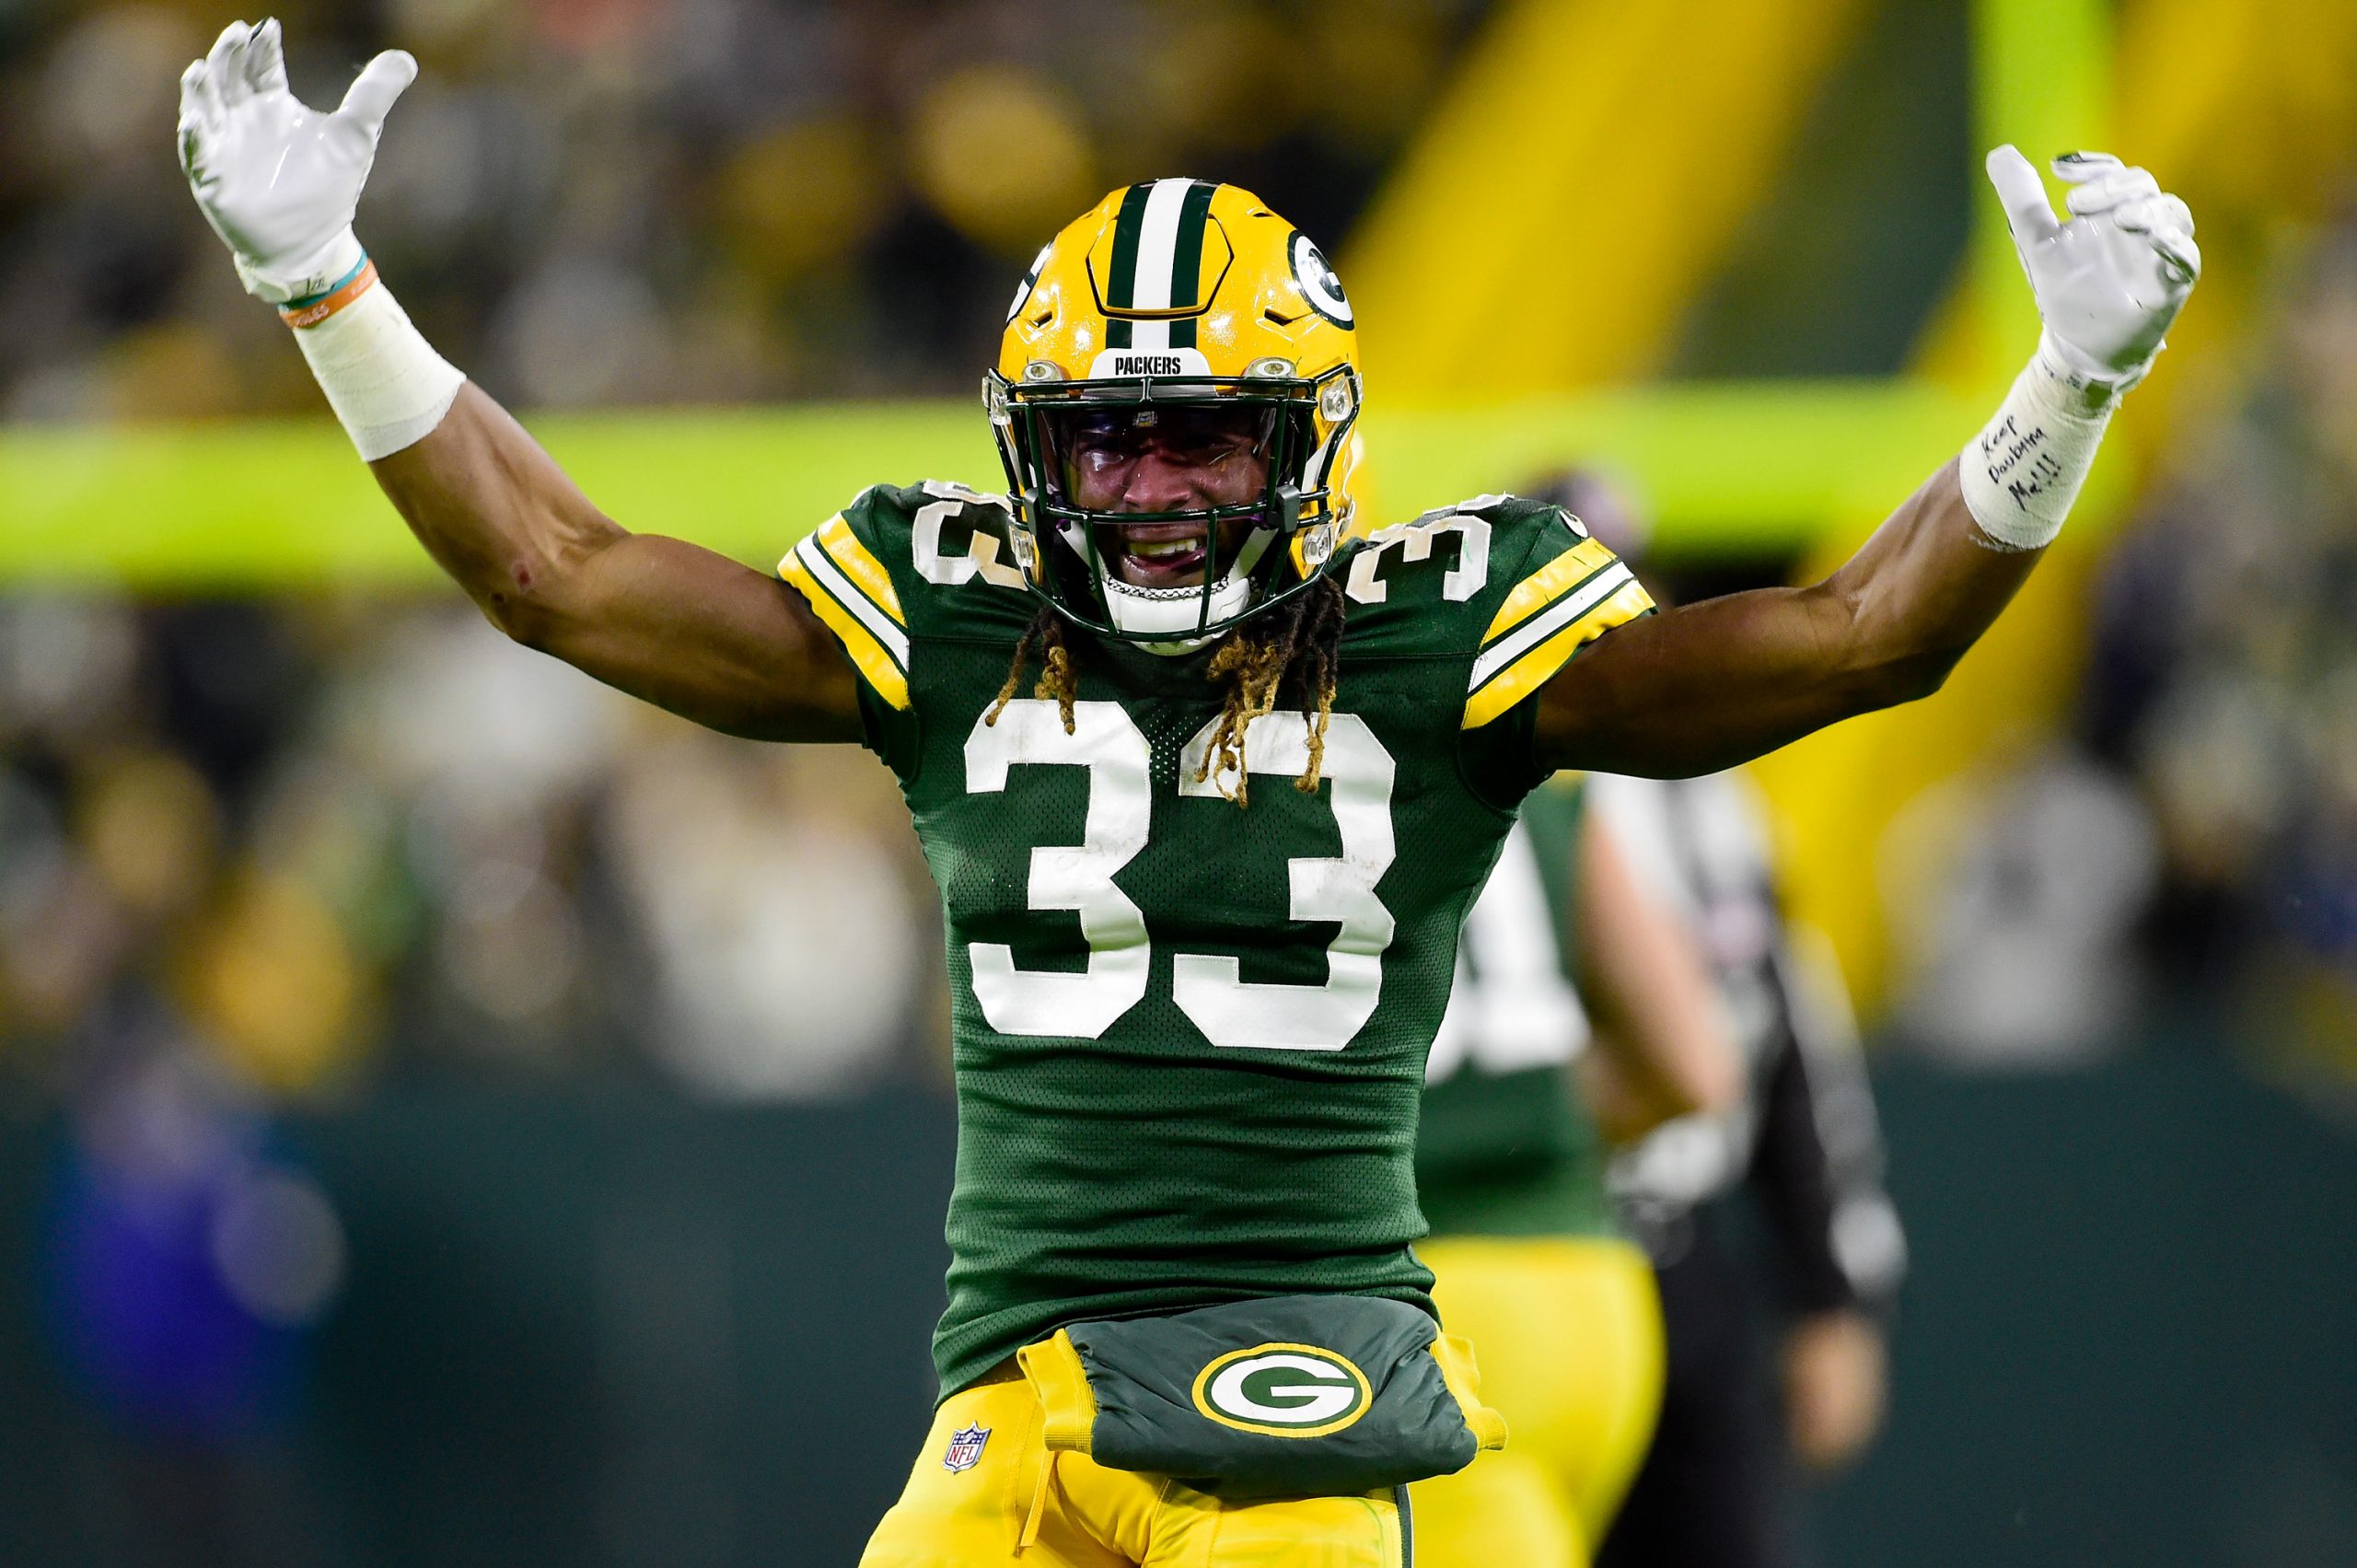 Aaron Jones of the Green Bay Packers celebrates after a first down.